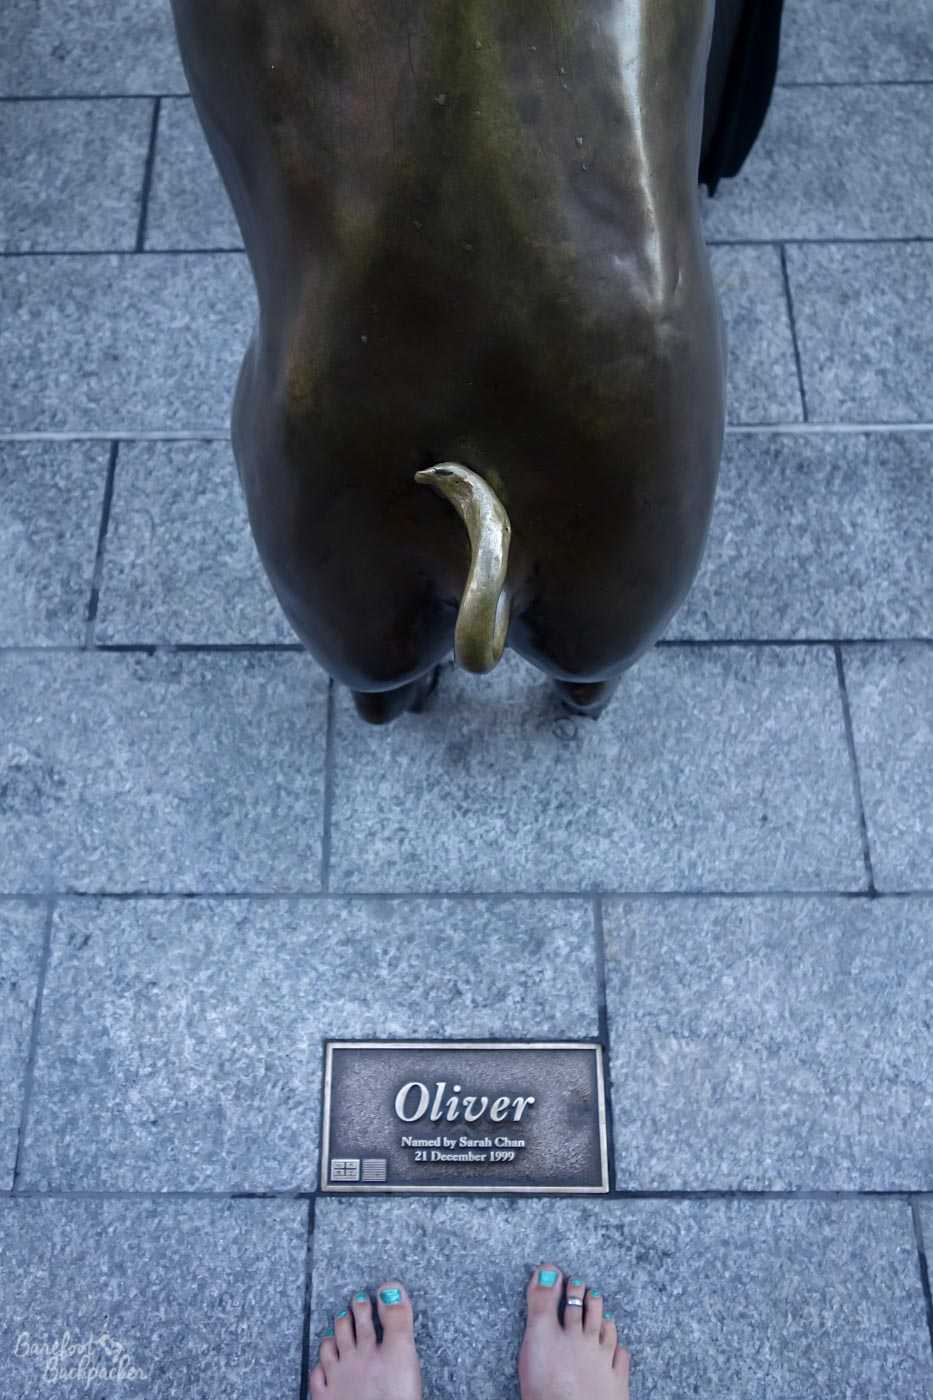 One of the pigs is called 'Oliver', according to the plaque on the pavement just behind his rear legs. This is apt given that's also my name. Obviously I had to take a selfie with him; obviously, this being me, the selfie is of my bare feet near his.